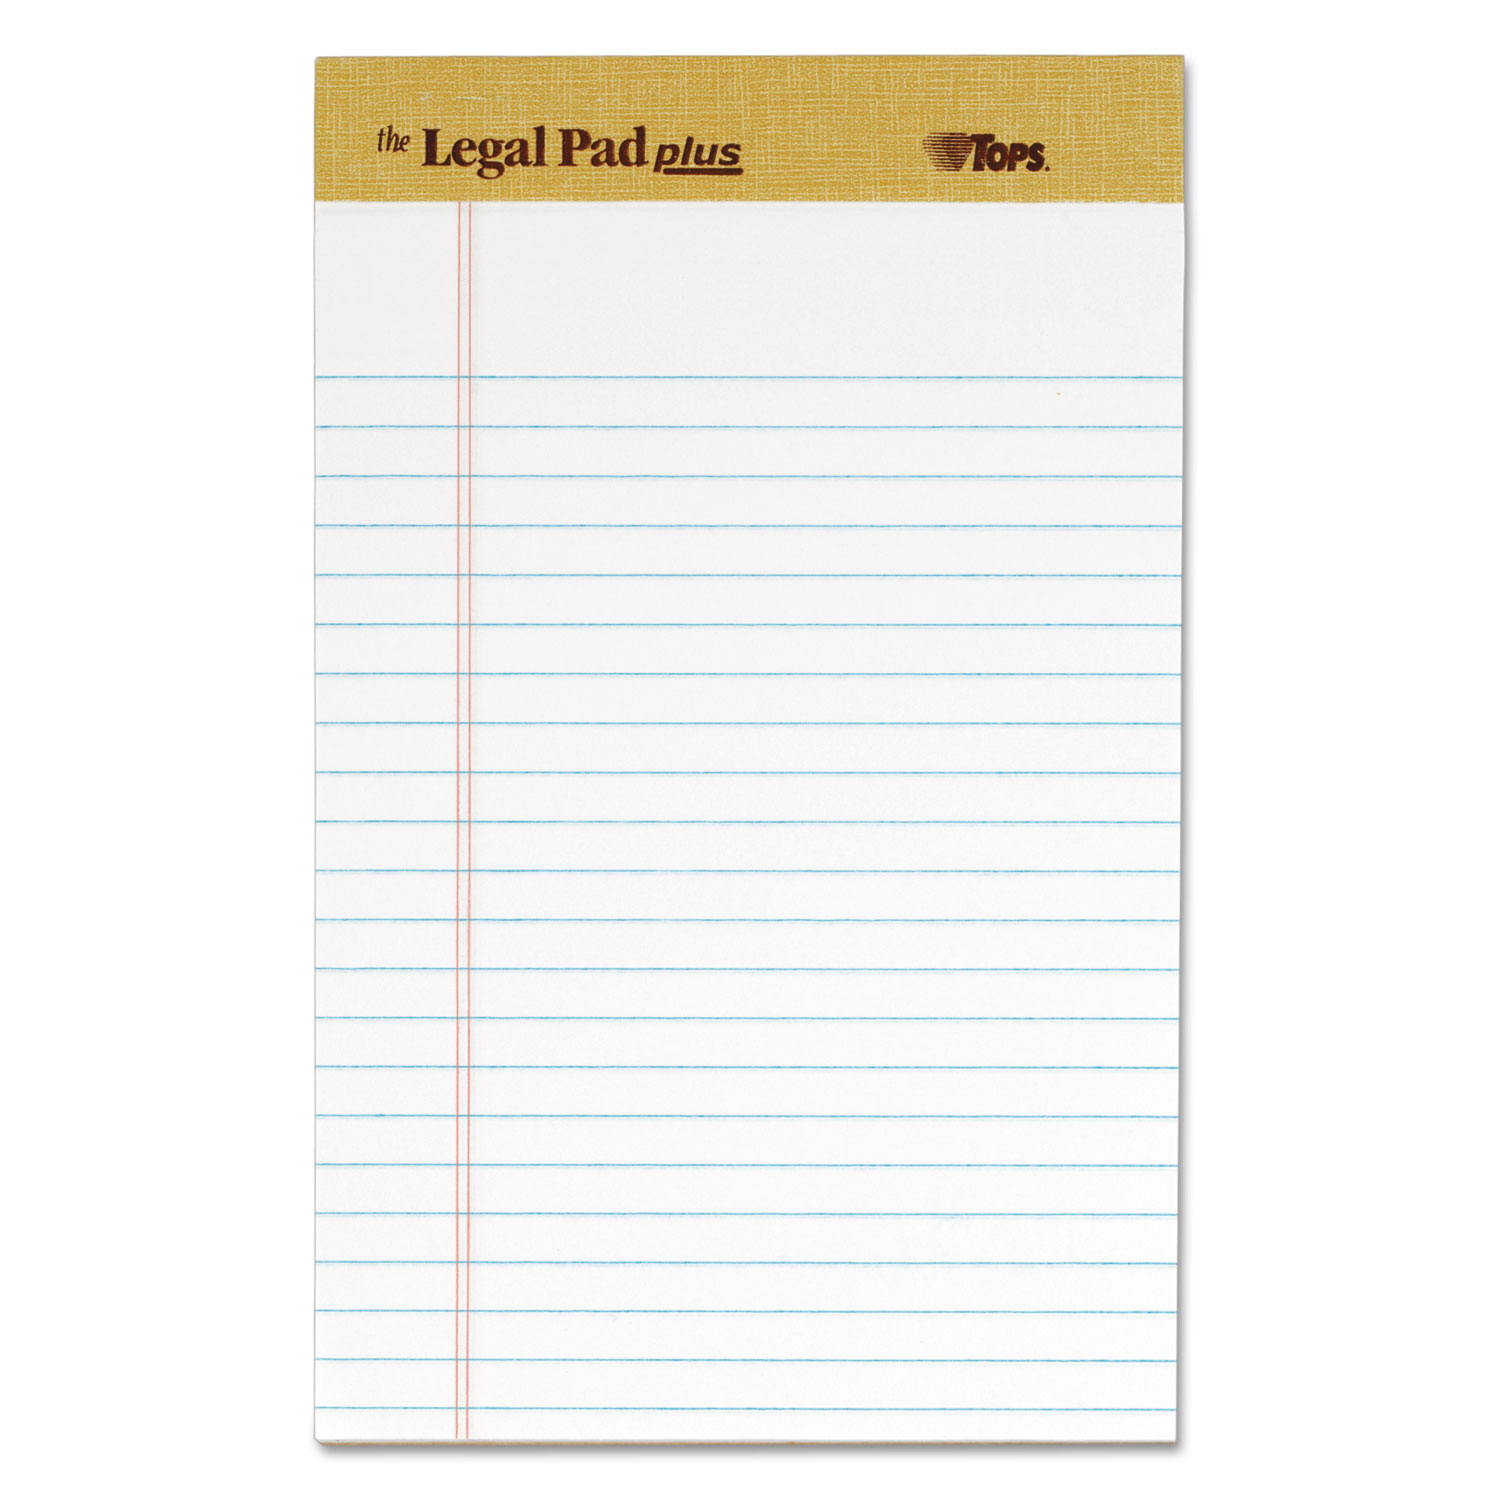 Tops The Legal Pad Ruled Pads, Wide/Legal Rule, 11.75 x 8.5, Canary, 50 Sheets, Dozen